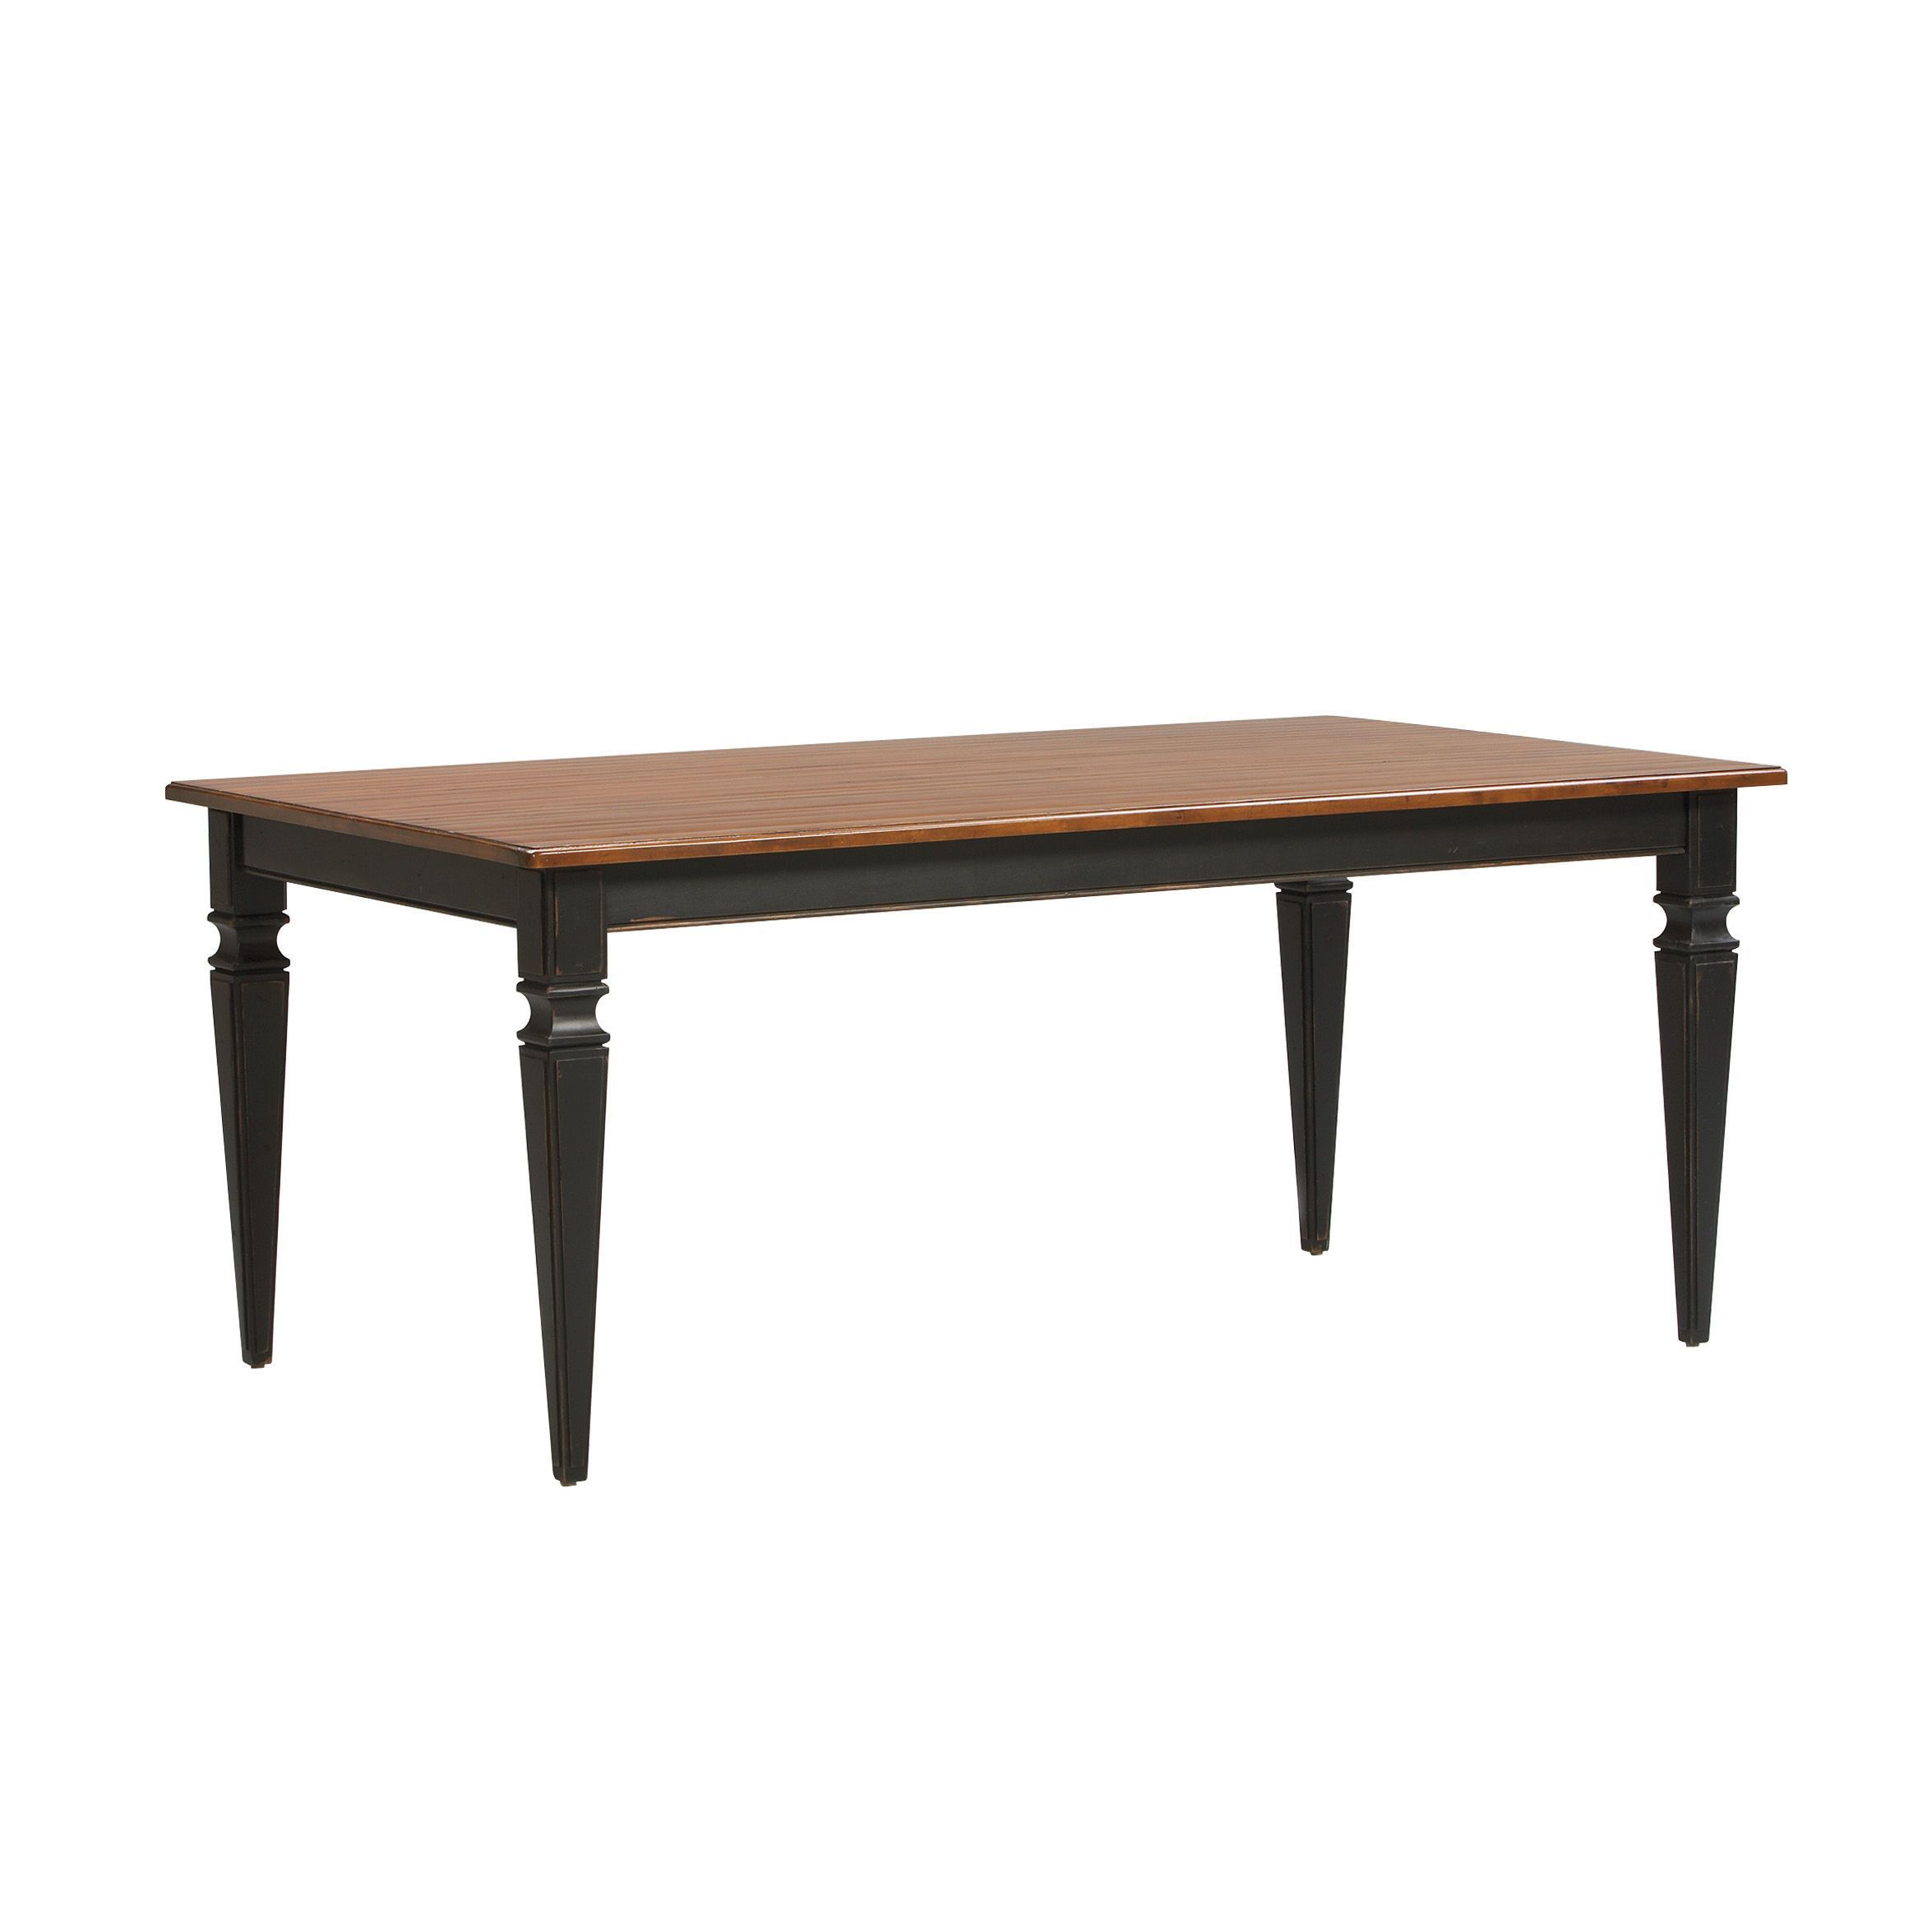 Large Avery Wavy Top Dining Table – Ethan Allen Us $1279 For Best And Newest Avery Rectangular Dining Tables (Photo 2 of 25)